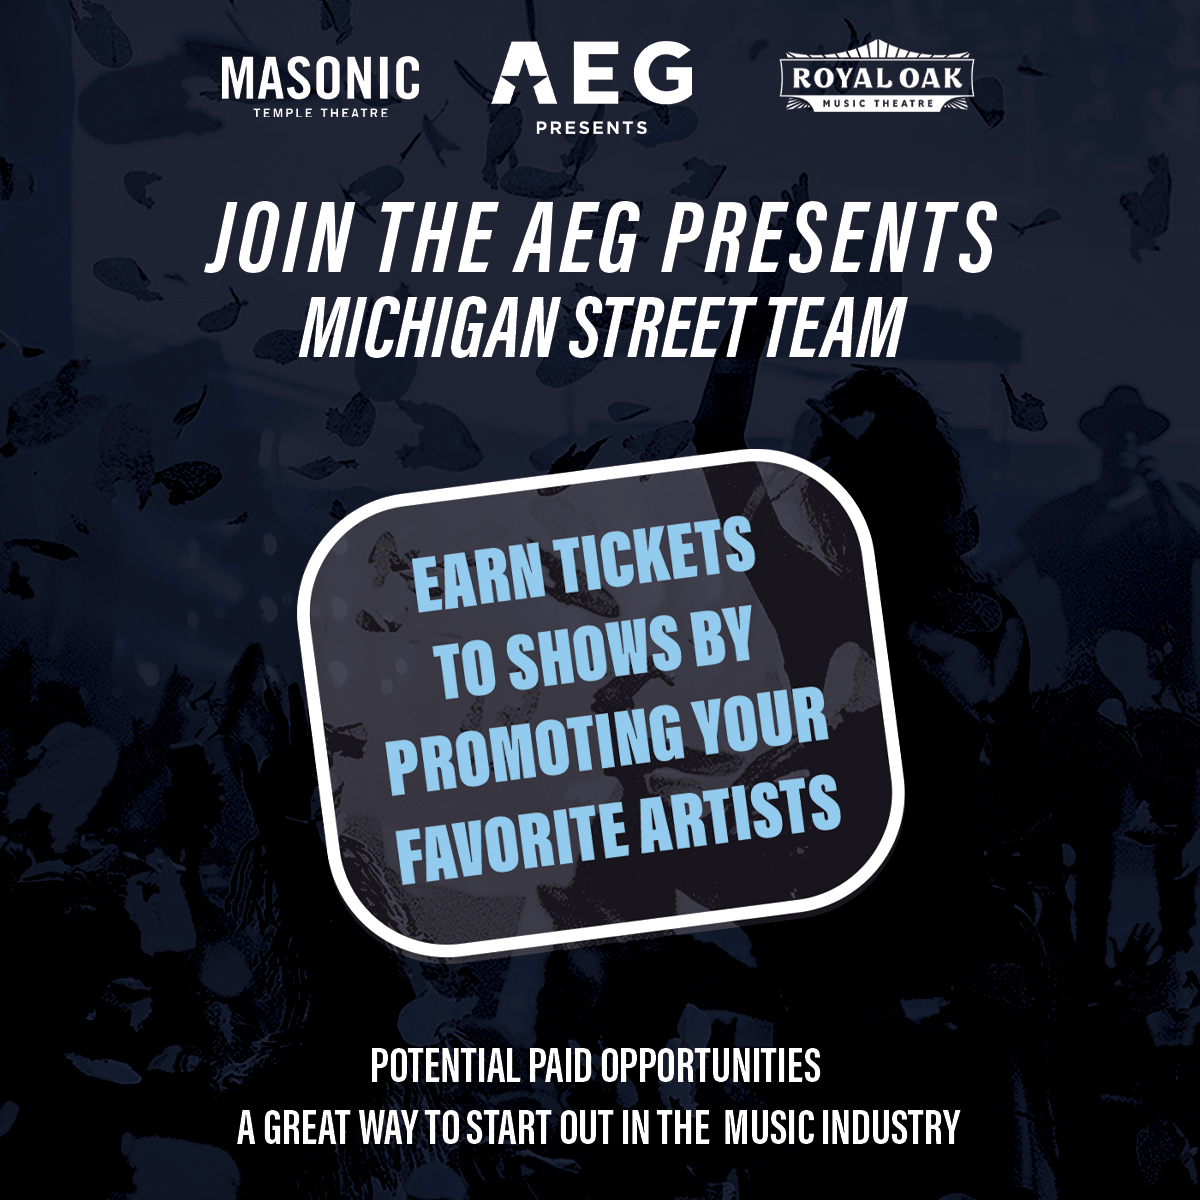 Looking to break into the music industry? Join us on Saturday, April 20th at the Masonic Temple for an informal chat about joining the AEG Michigan Street Team! ⏰ 12:30 pm - 1pm 🗓 Sat. April 20th ℹ️ RSVP at promotions@RoyalOakMusicTheatre.com